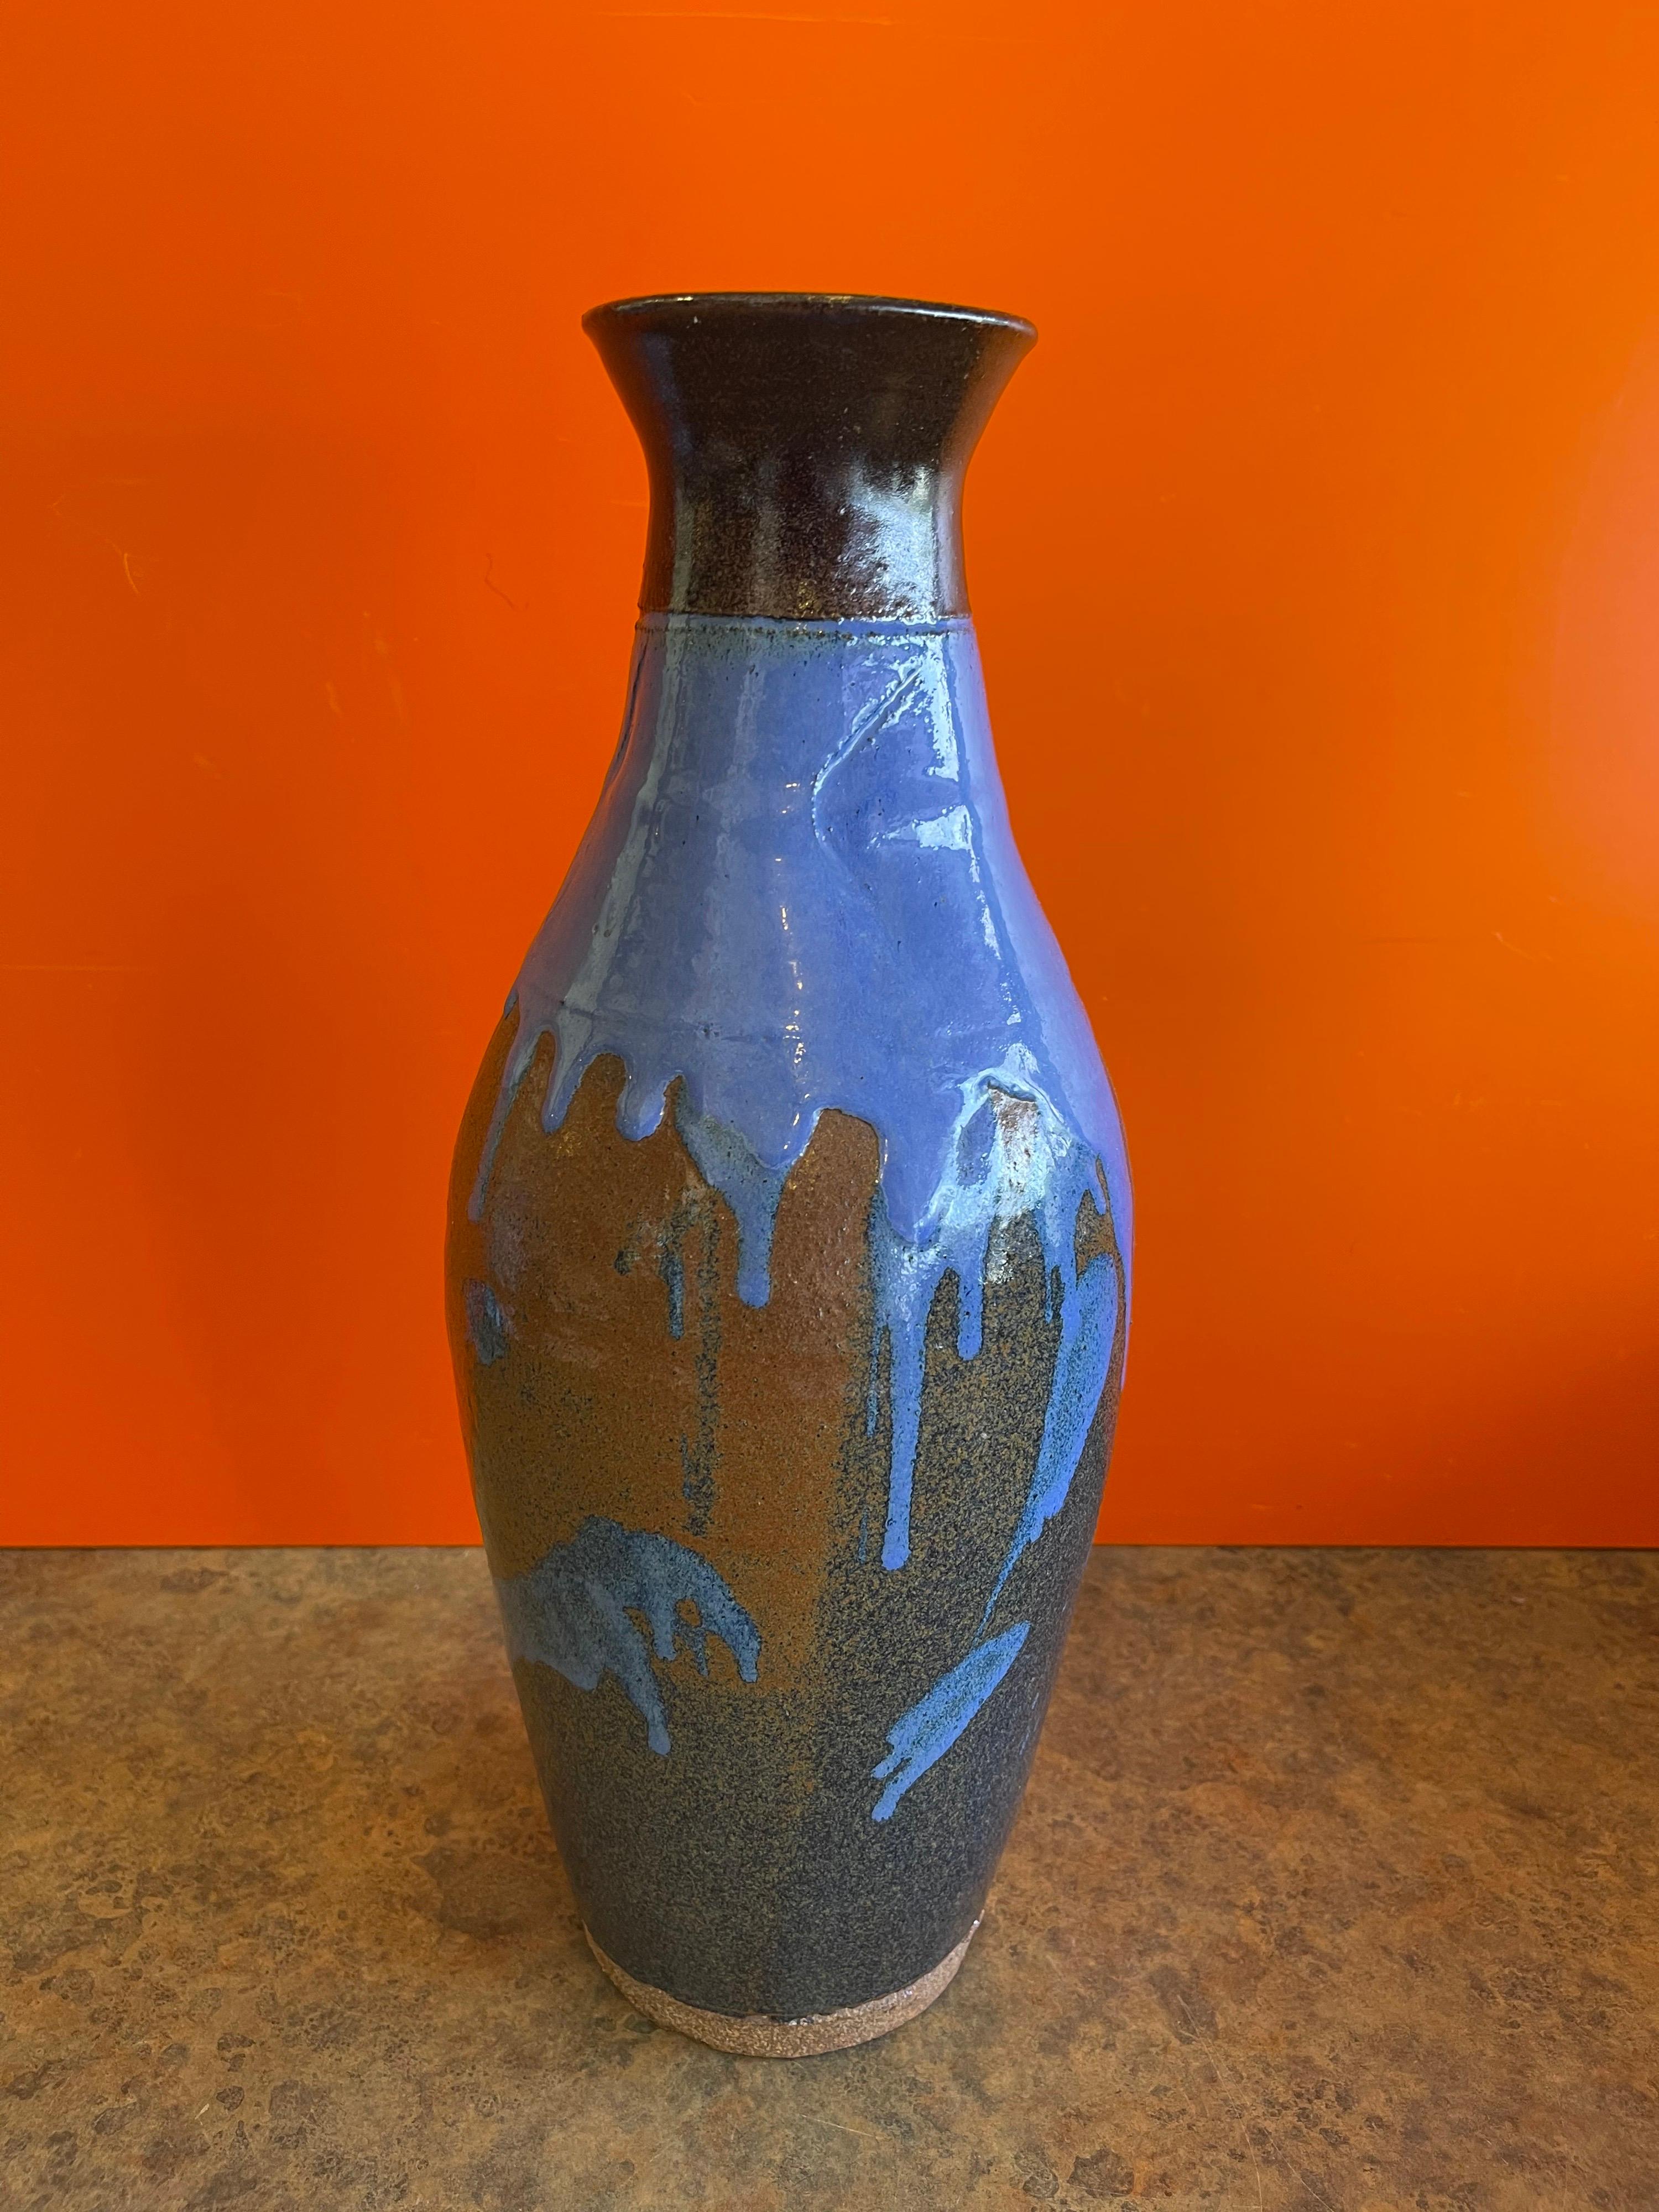 Mid-century studio pottery vase with blue drip glaze, circa 1980s. The vase is in very good vintage with no chips or cracks and measures 6.5